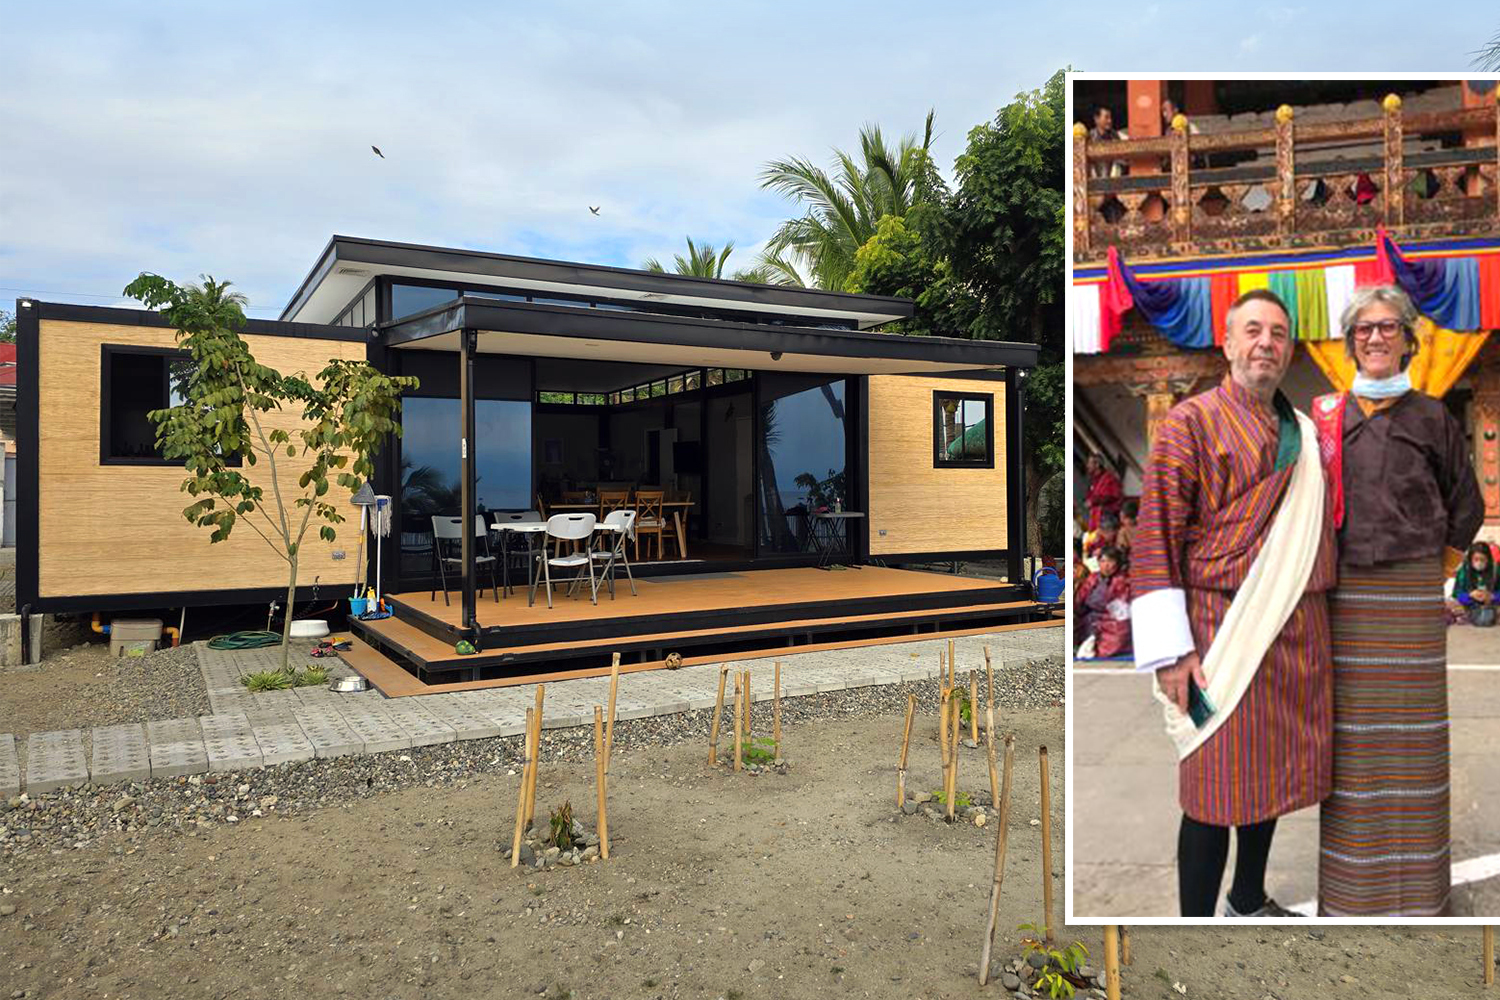 ‘We built our dream beach house in the Philippines’